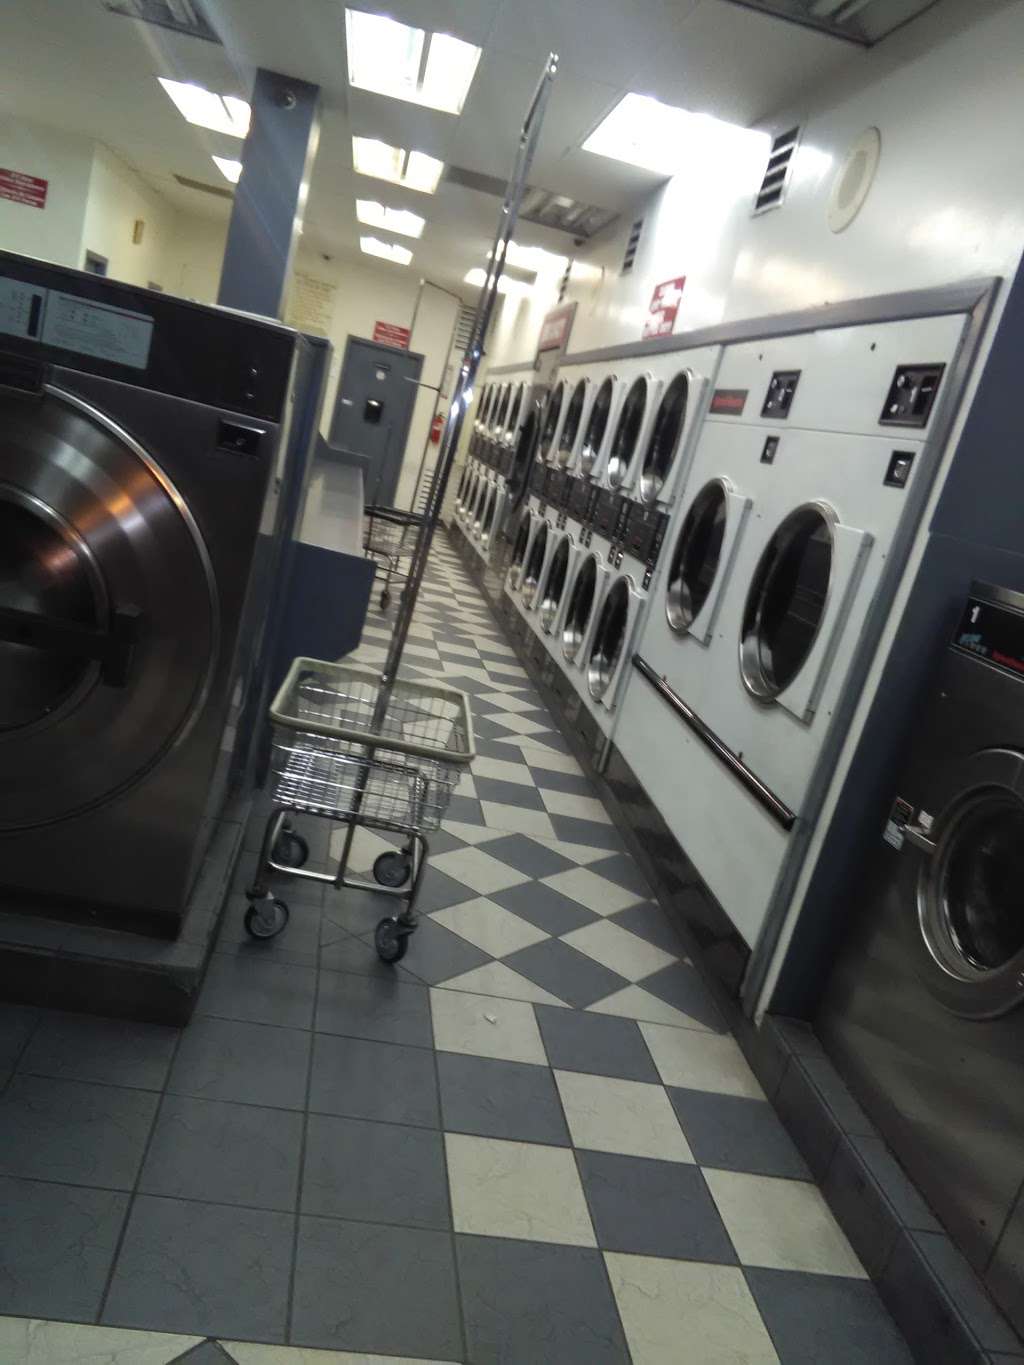 Mr Bubbles 24 Hour Laundry - laundry  | Photo 5 of 10 | Address: 1360 S Mission Rd, Fallbrook, CA 92028, USA | Phone: (760) 731-9767